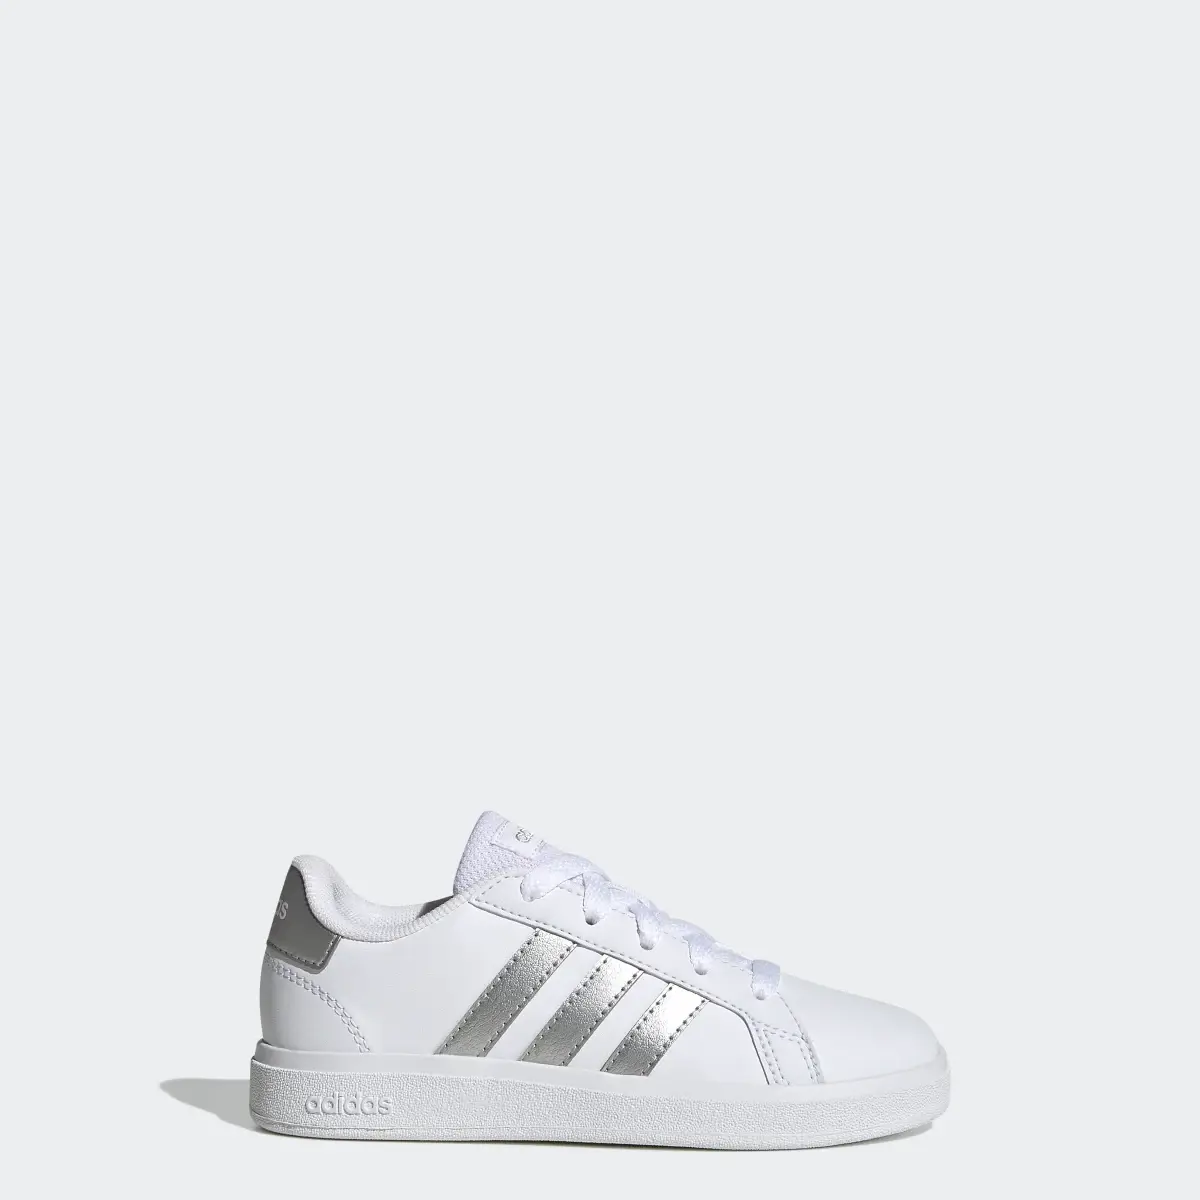 Adidas Grand Court Lifestyle Tennis Lace-Up Schuh. 1